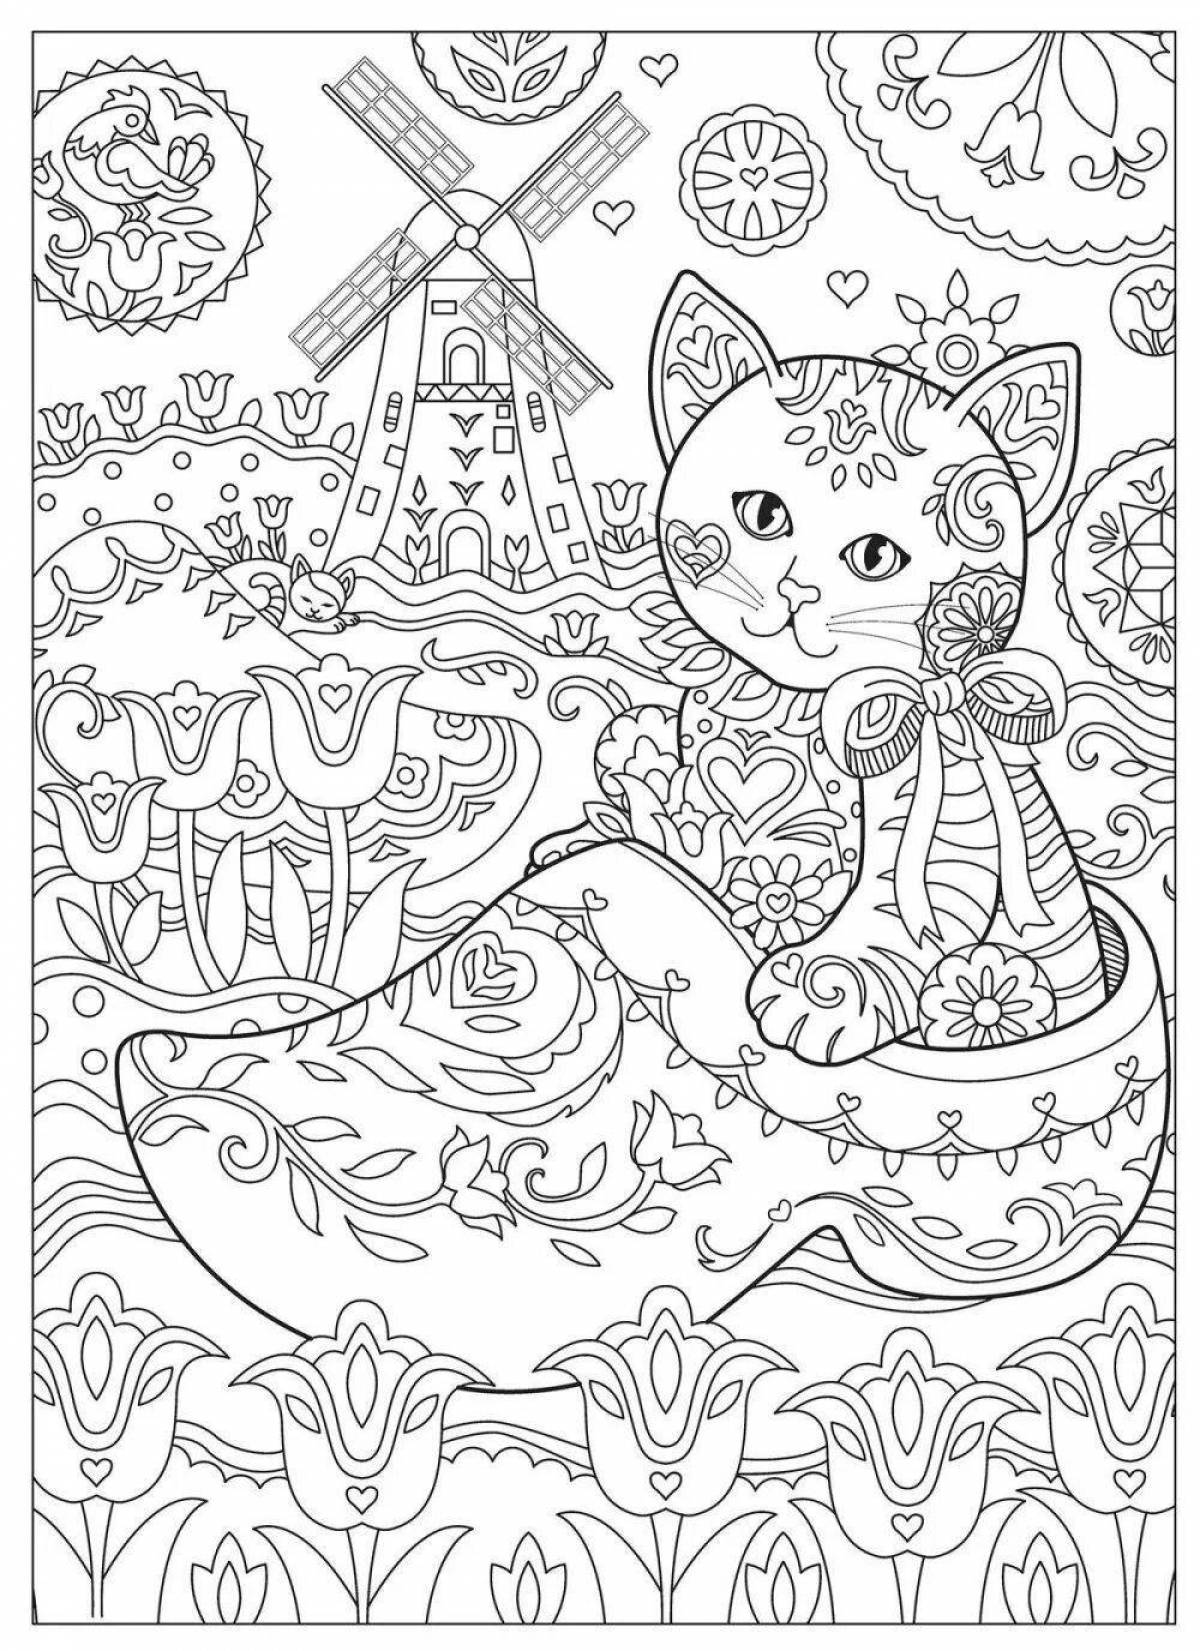 Great anti-stress cat coloring book for girls